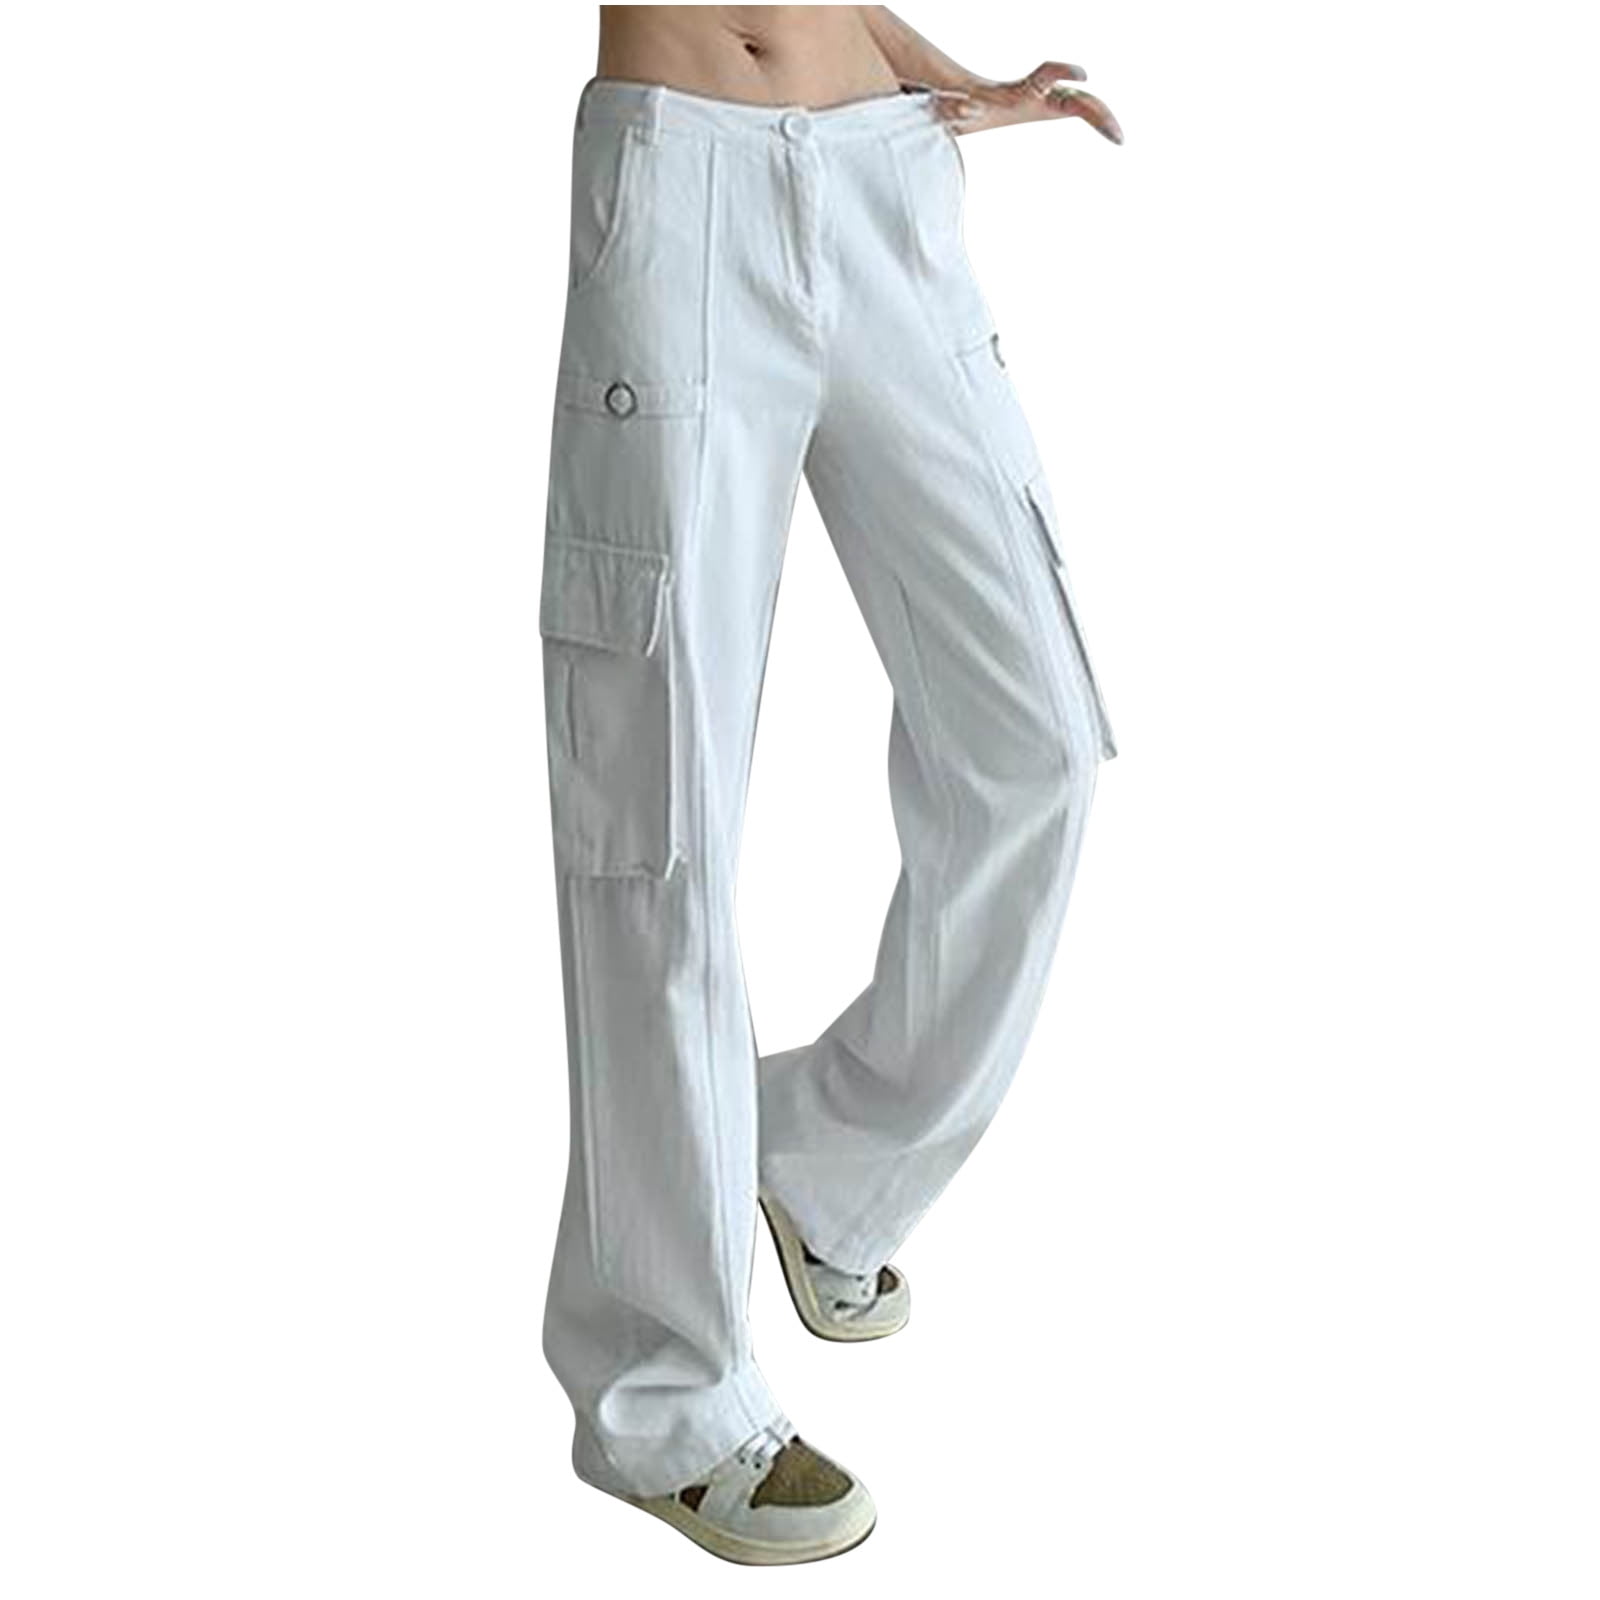 Hfyihgf High Waisted Baggy Jeans for Women Stretch Straight Y2K Trendy Wide  Leg Denim Pants Casual Relaxed Fit Multi-pocket Cargo Pants(White,XL) 